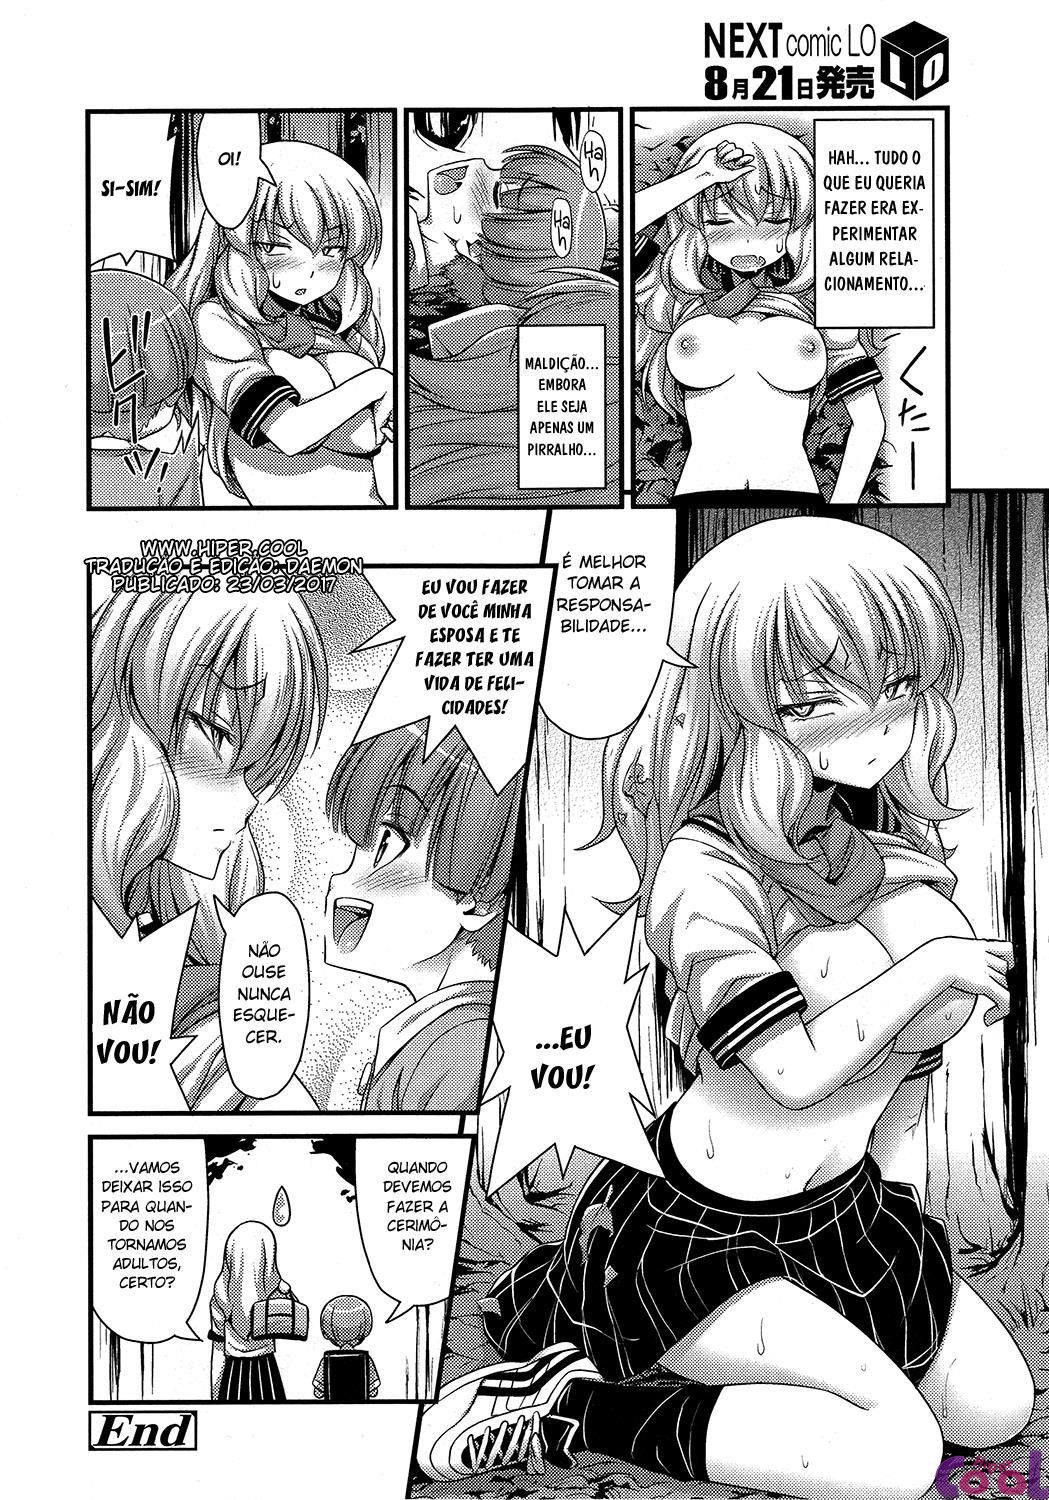 chu-gakusei-nikki-or-middle-smooch-student-diary-chapter-01-page-18.jpg